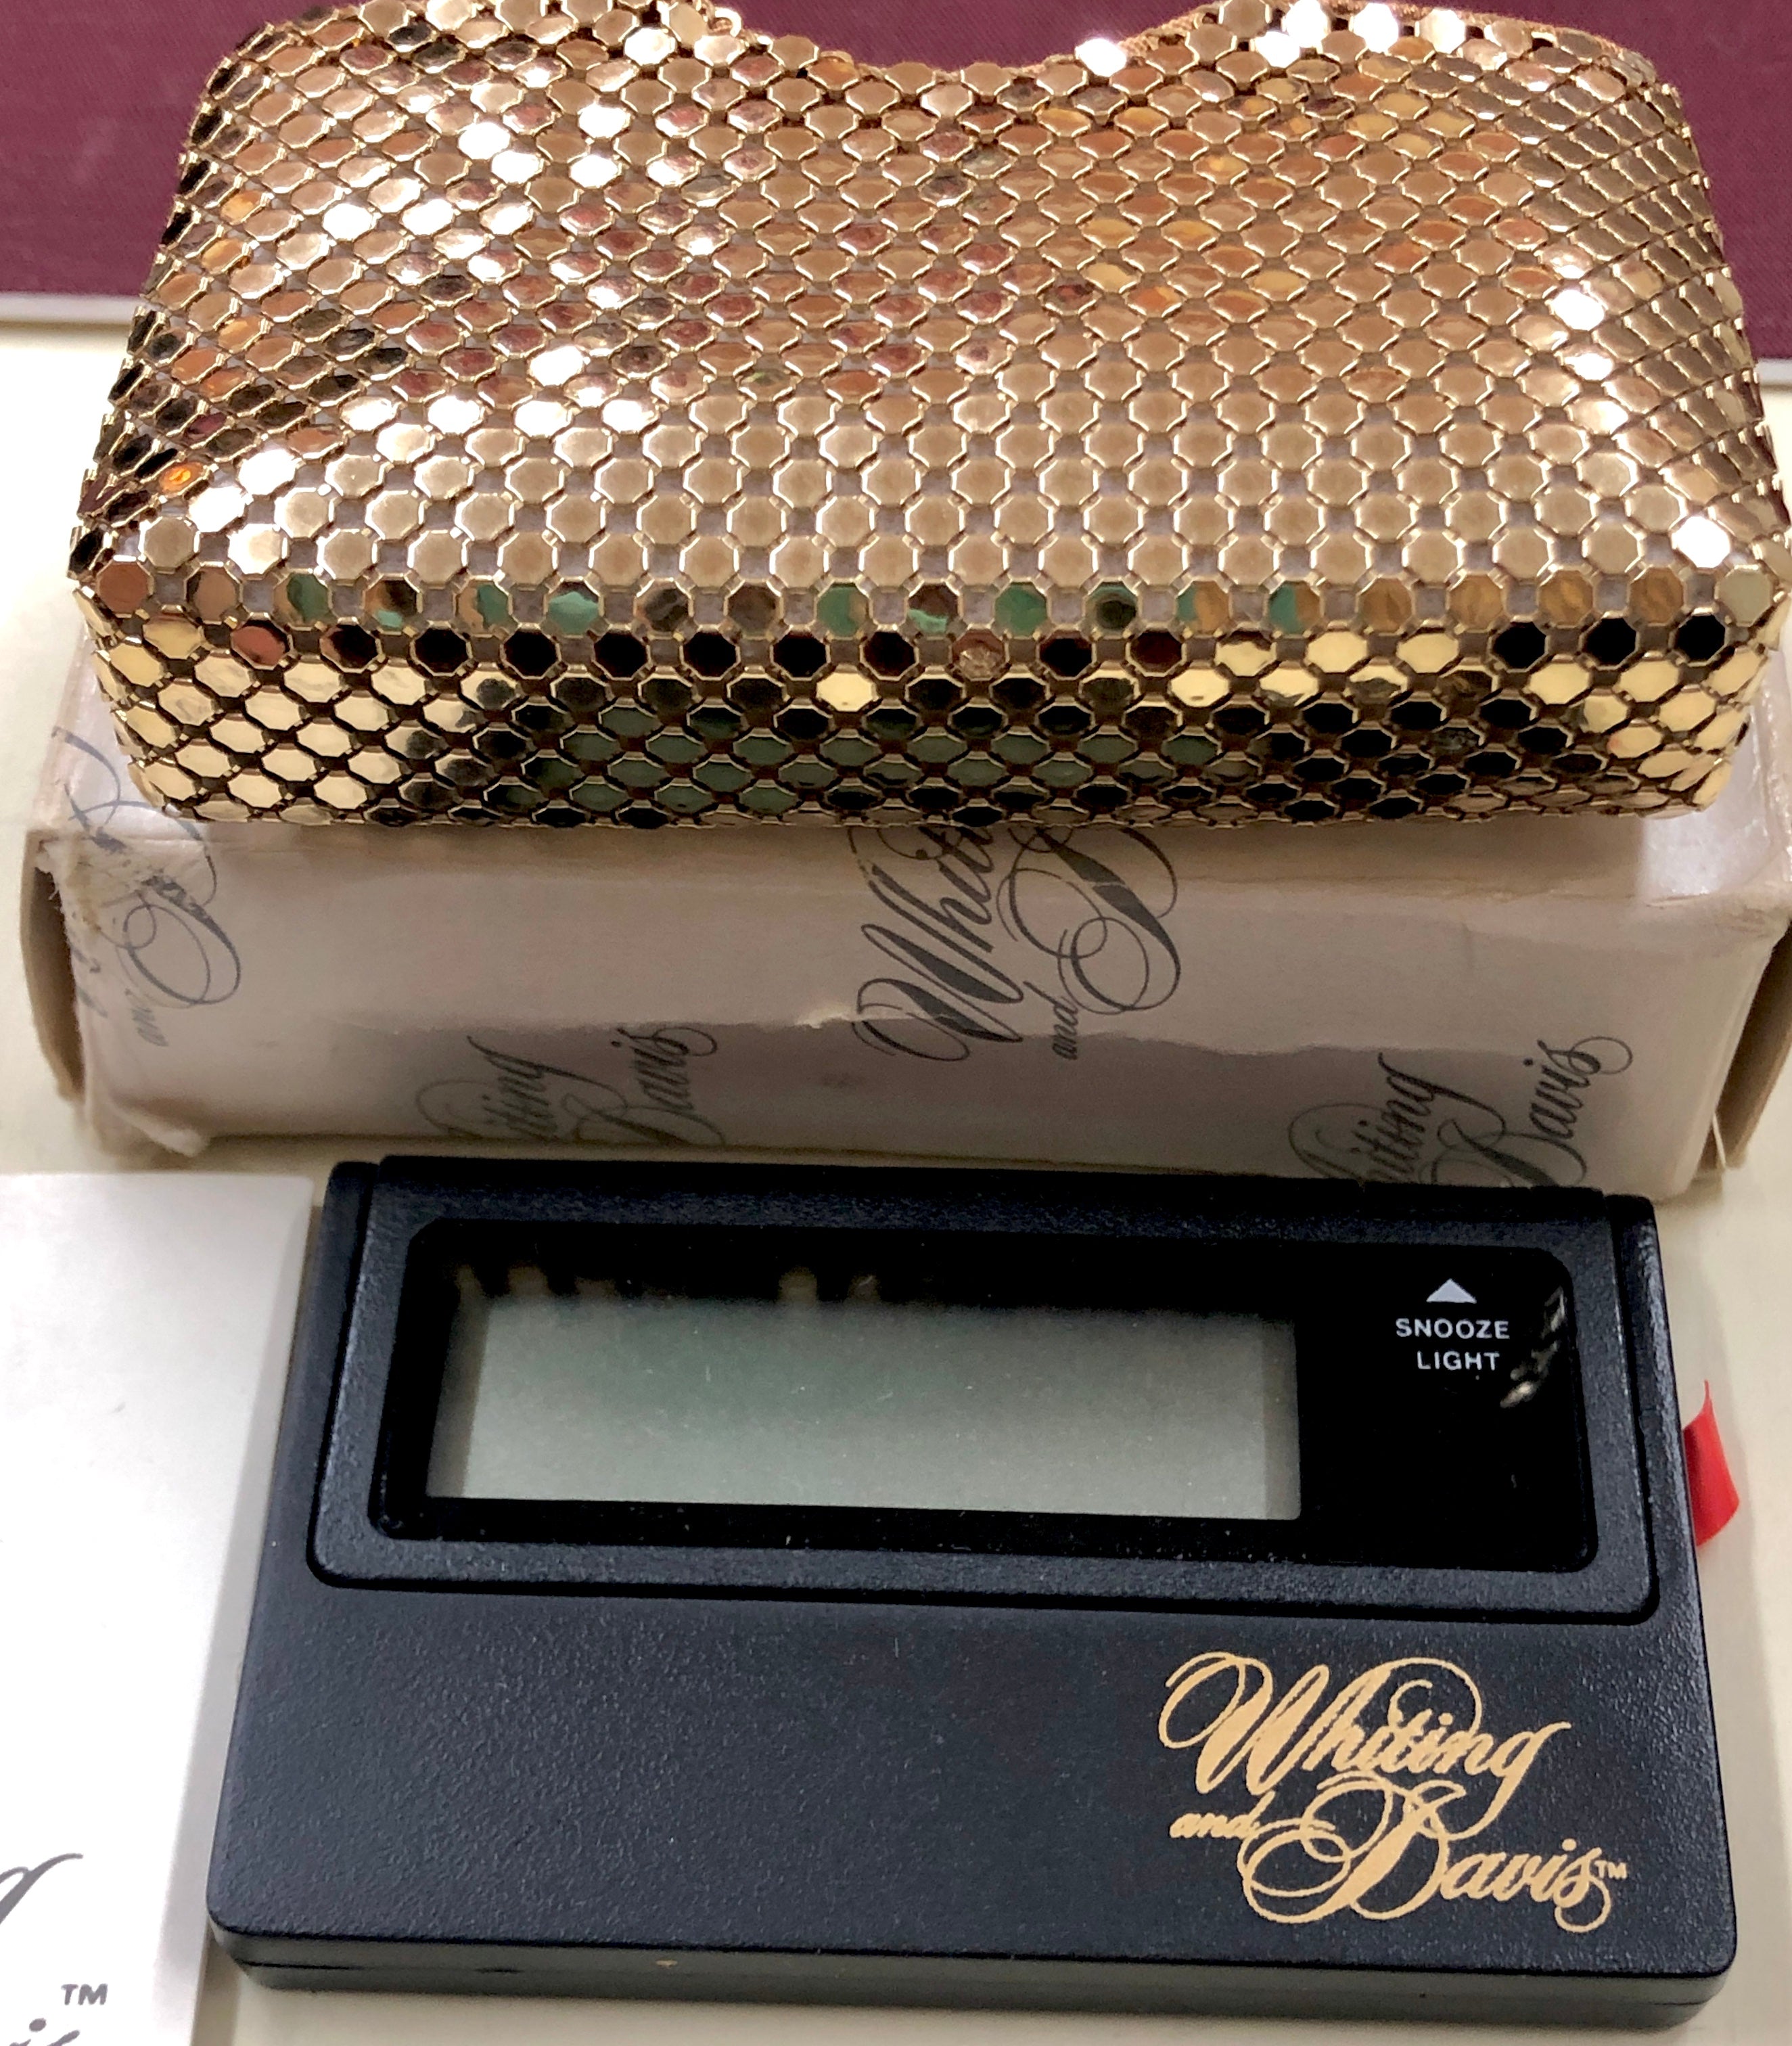 Vintage Whiting & Davis Never Used Digital Travel Clock with Gold Metal Mesh Case